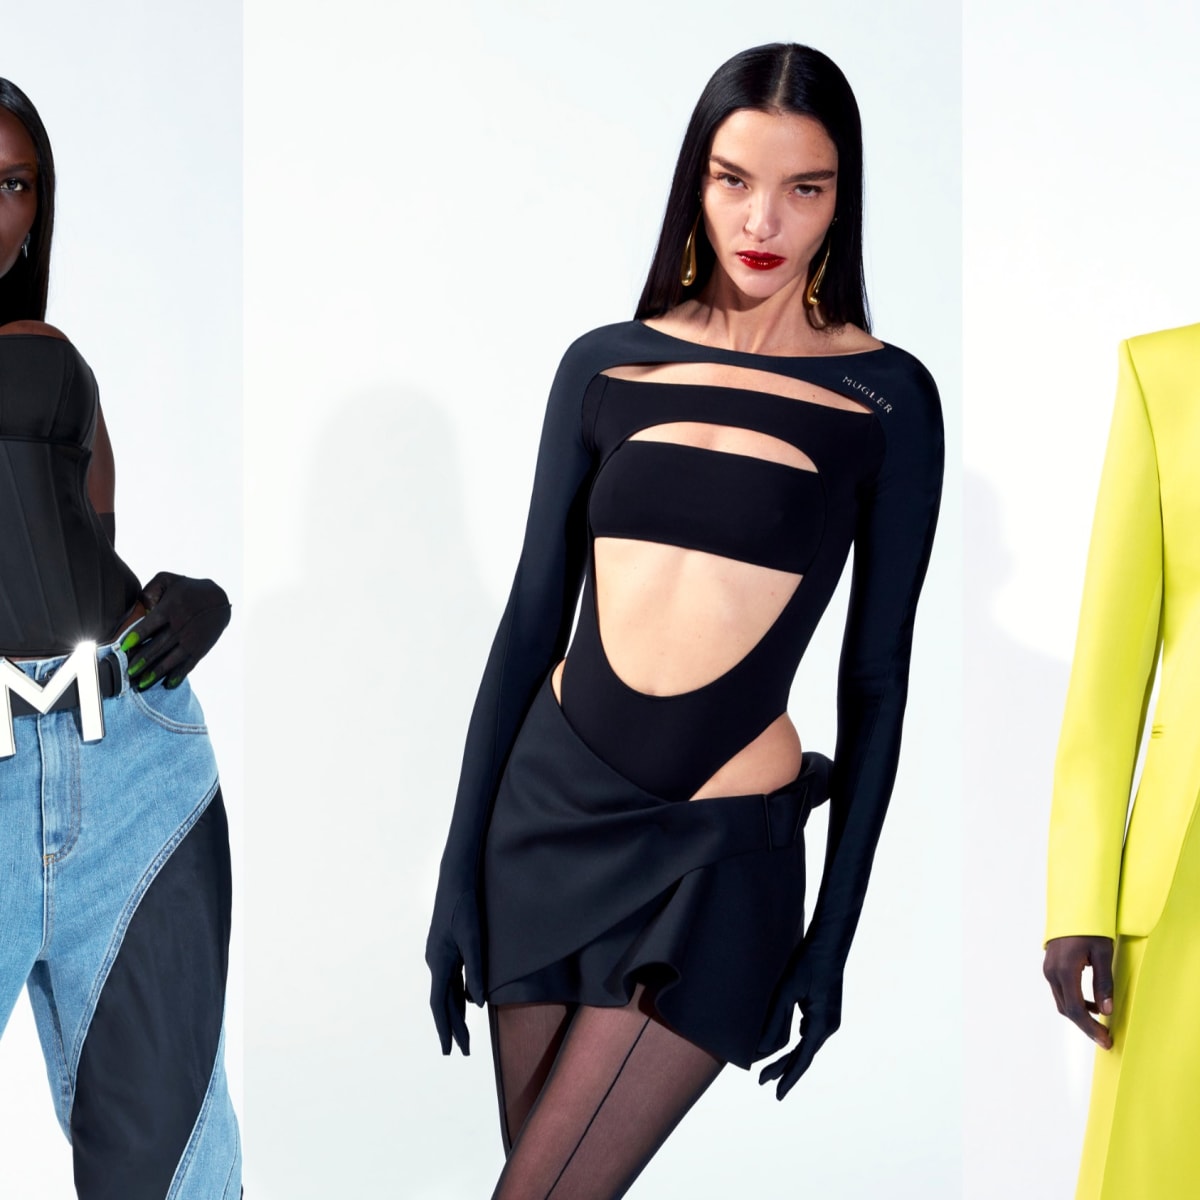 The Mugler x H&M collaboration launches today